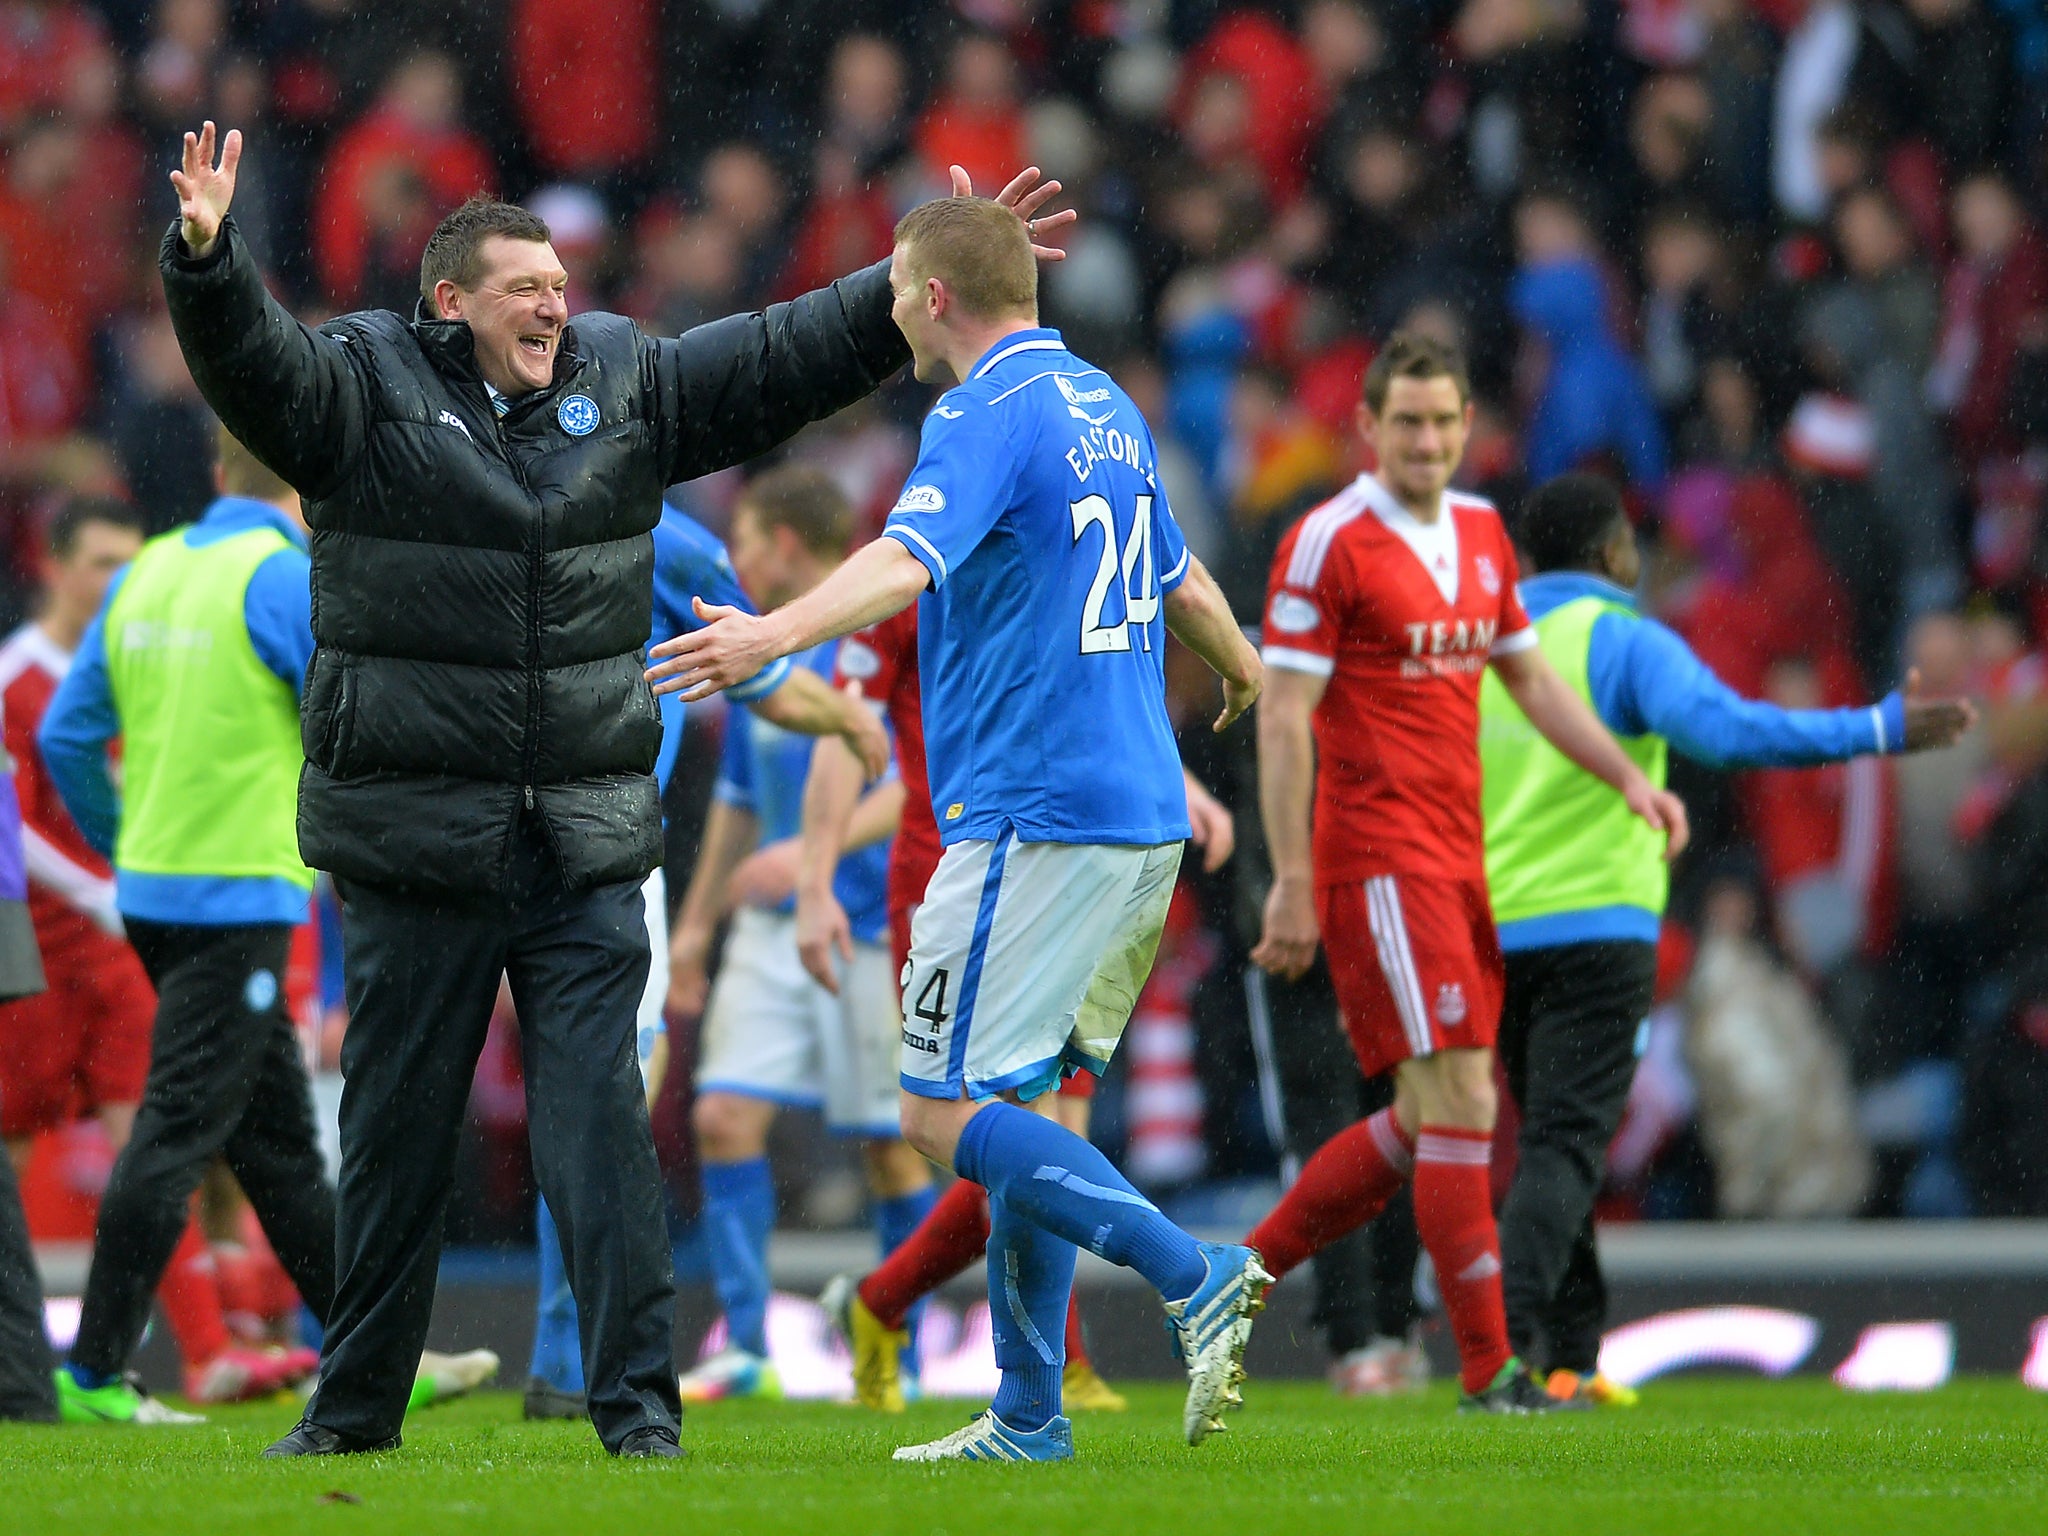 St Johnstone manager Tommy Wright celebrates with Brian Easton after winning the Scottish Cup final